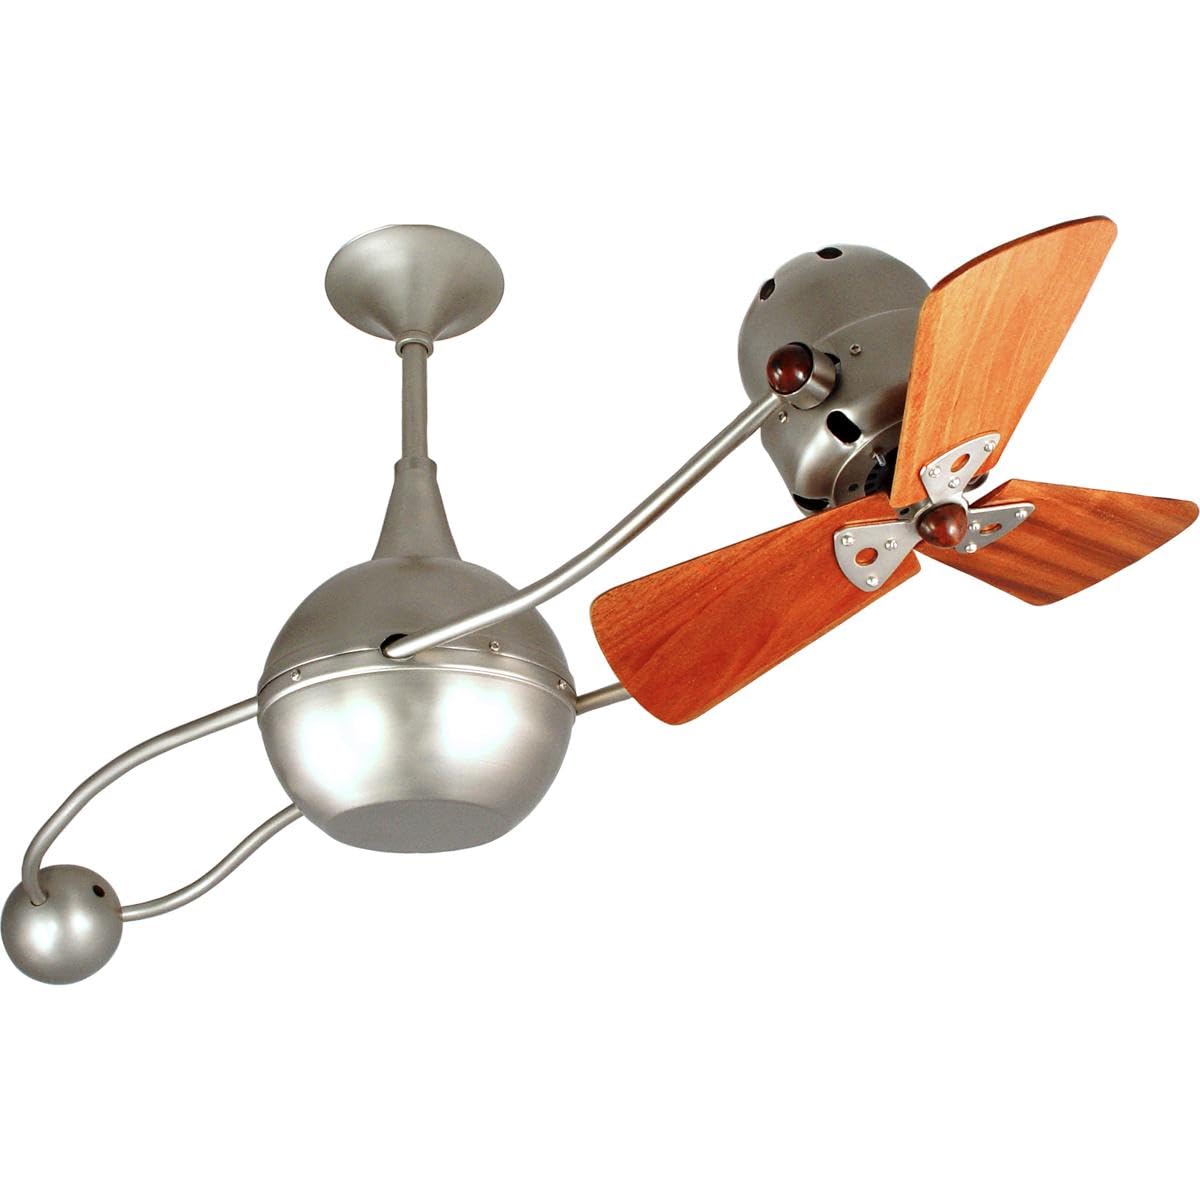 Matthews Fan B2K-BN-WD Brisa 360° counterweight rotational ceiling fan in Brushed Nickel finish with solid sustainable mahogany wood blades.